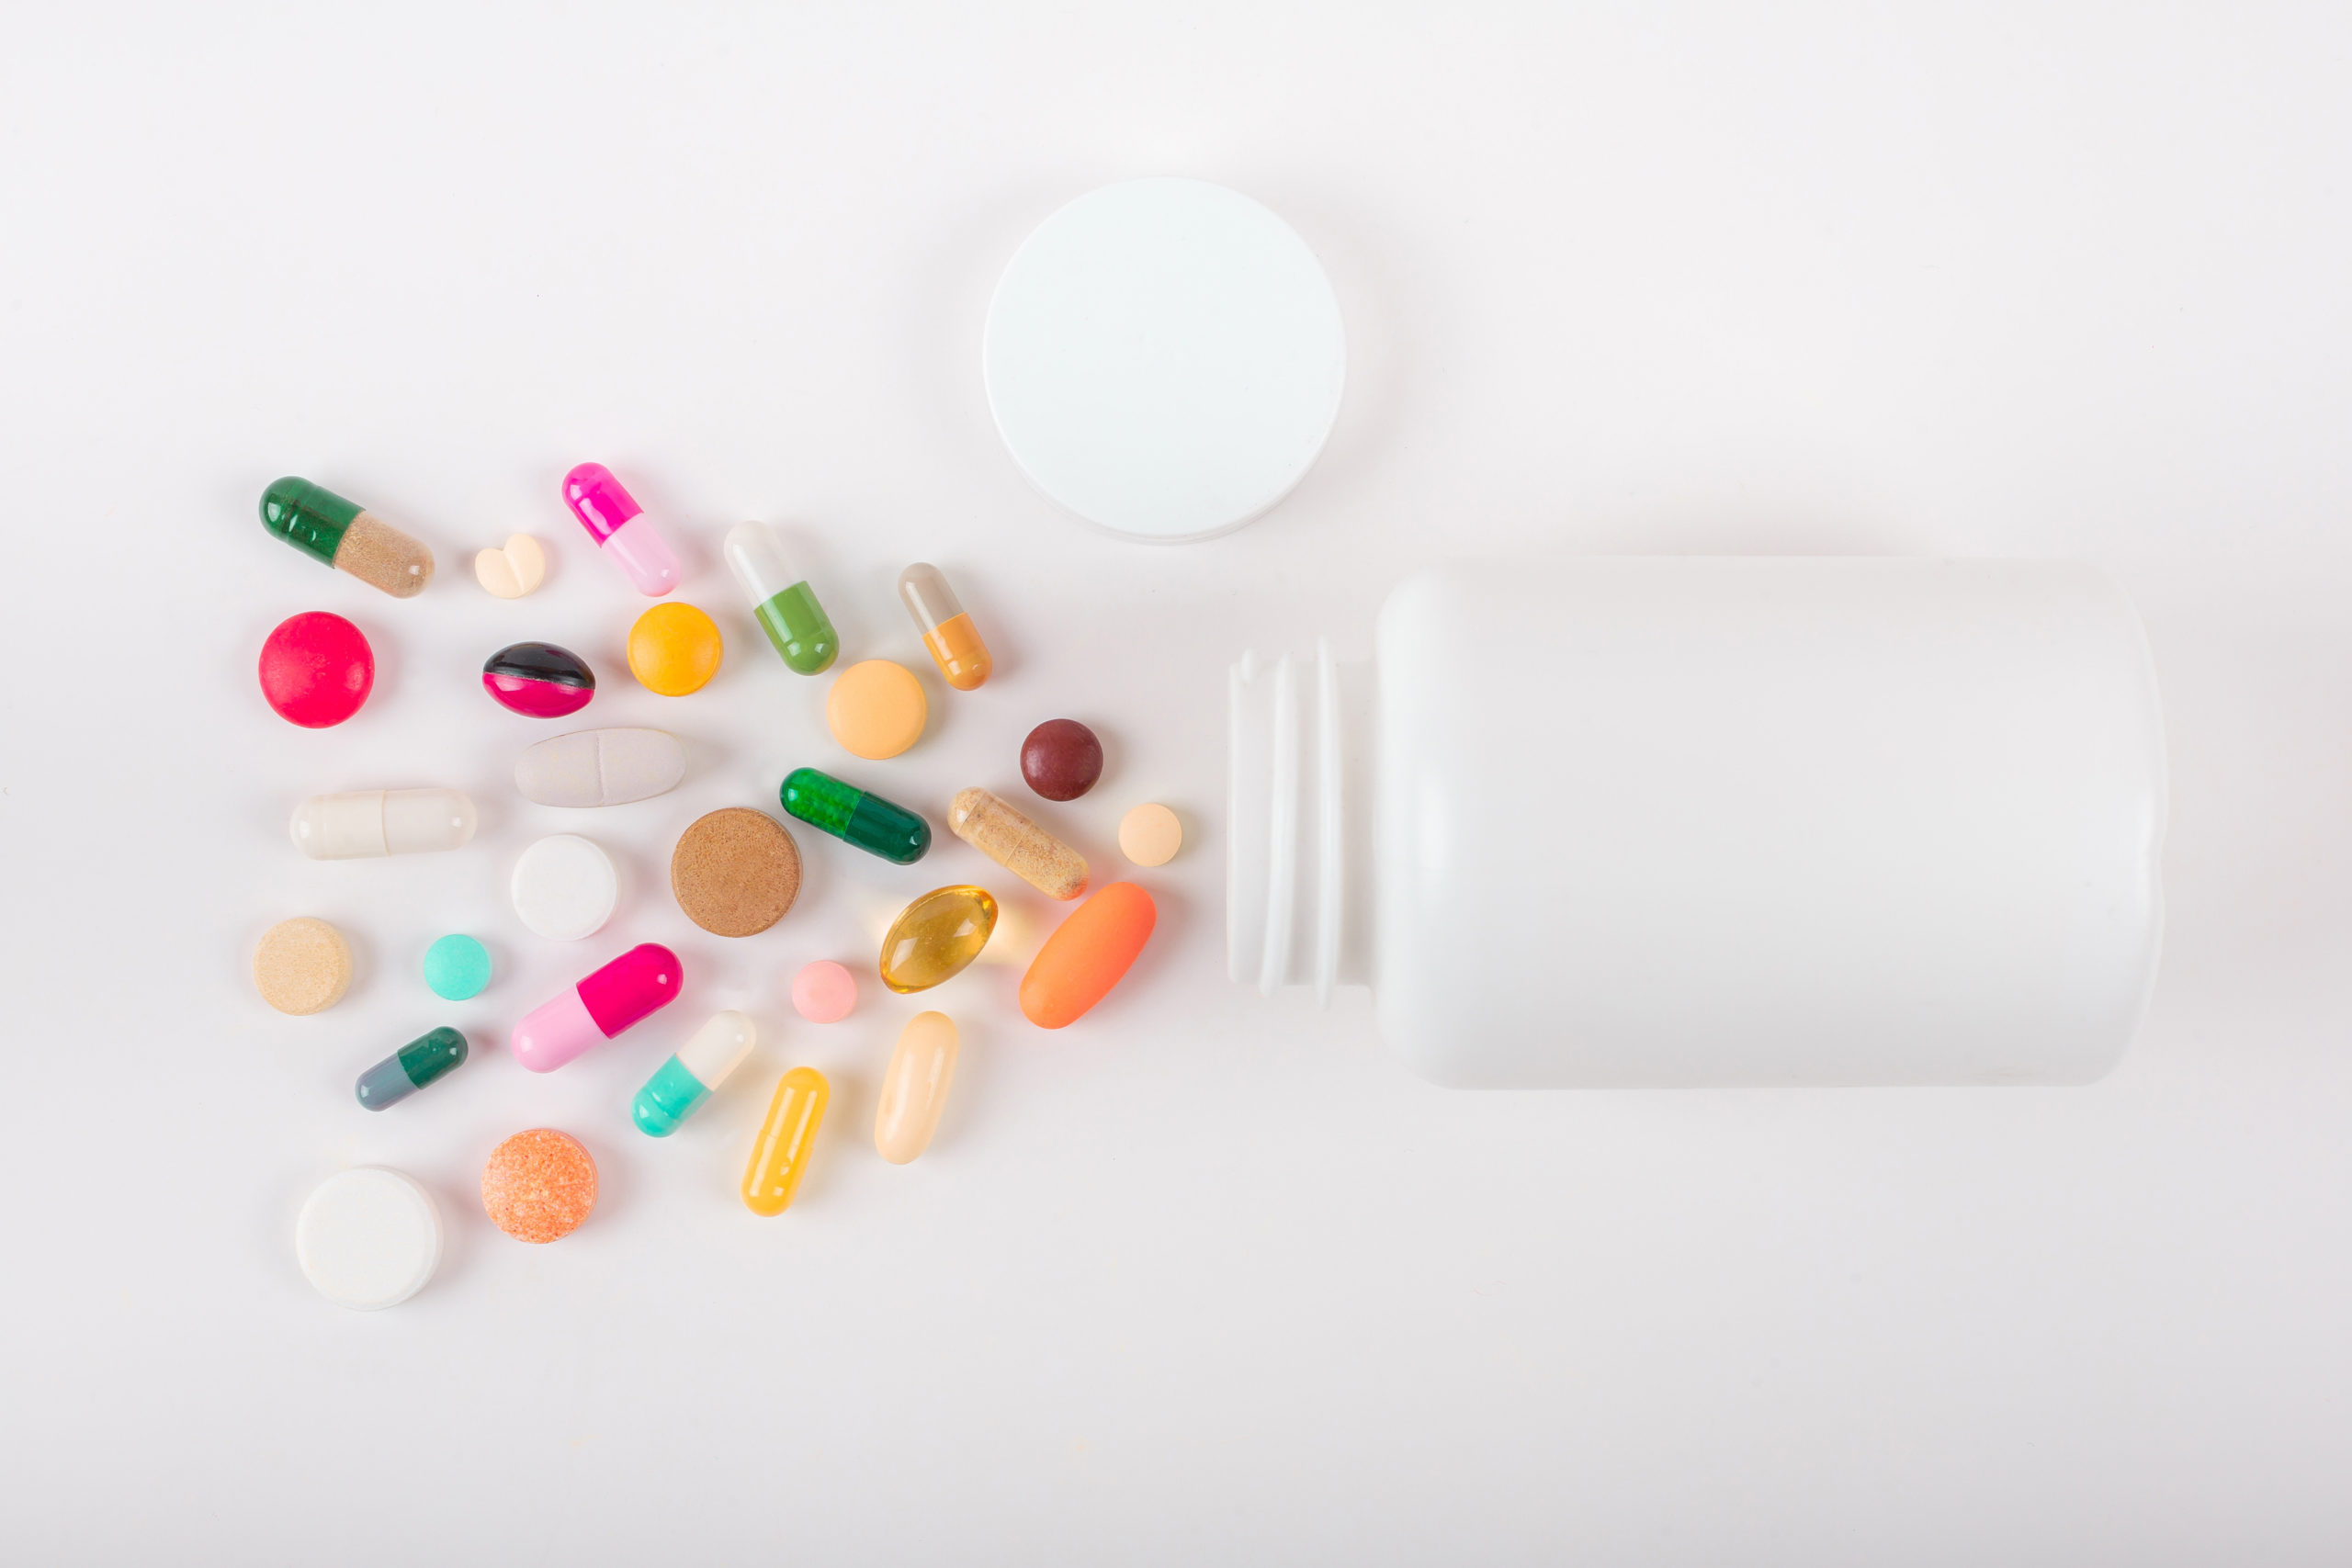 Assorted pharmaceutical medicine pills, tablets and capsules and bottle on white background. Copy space for text